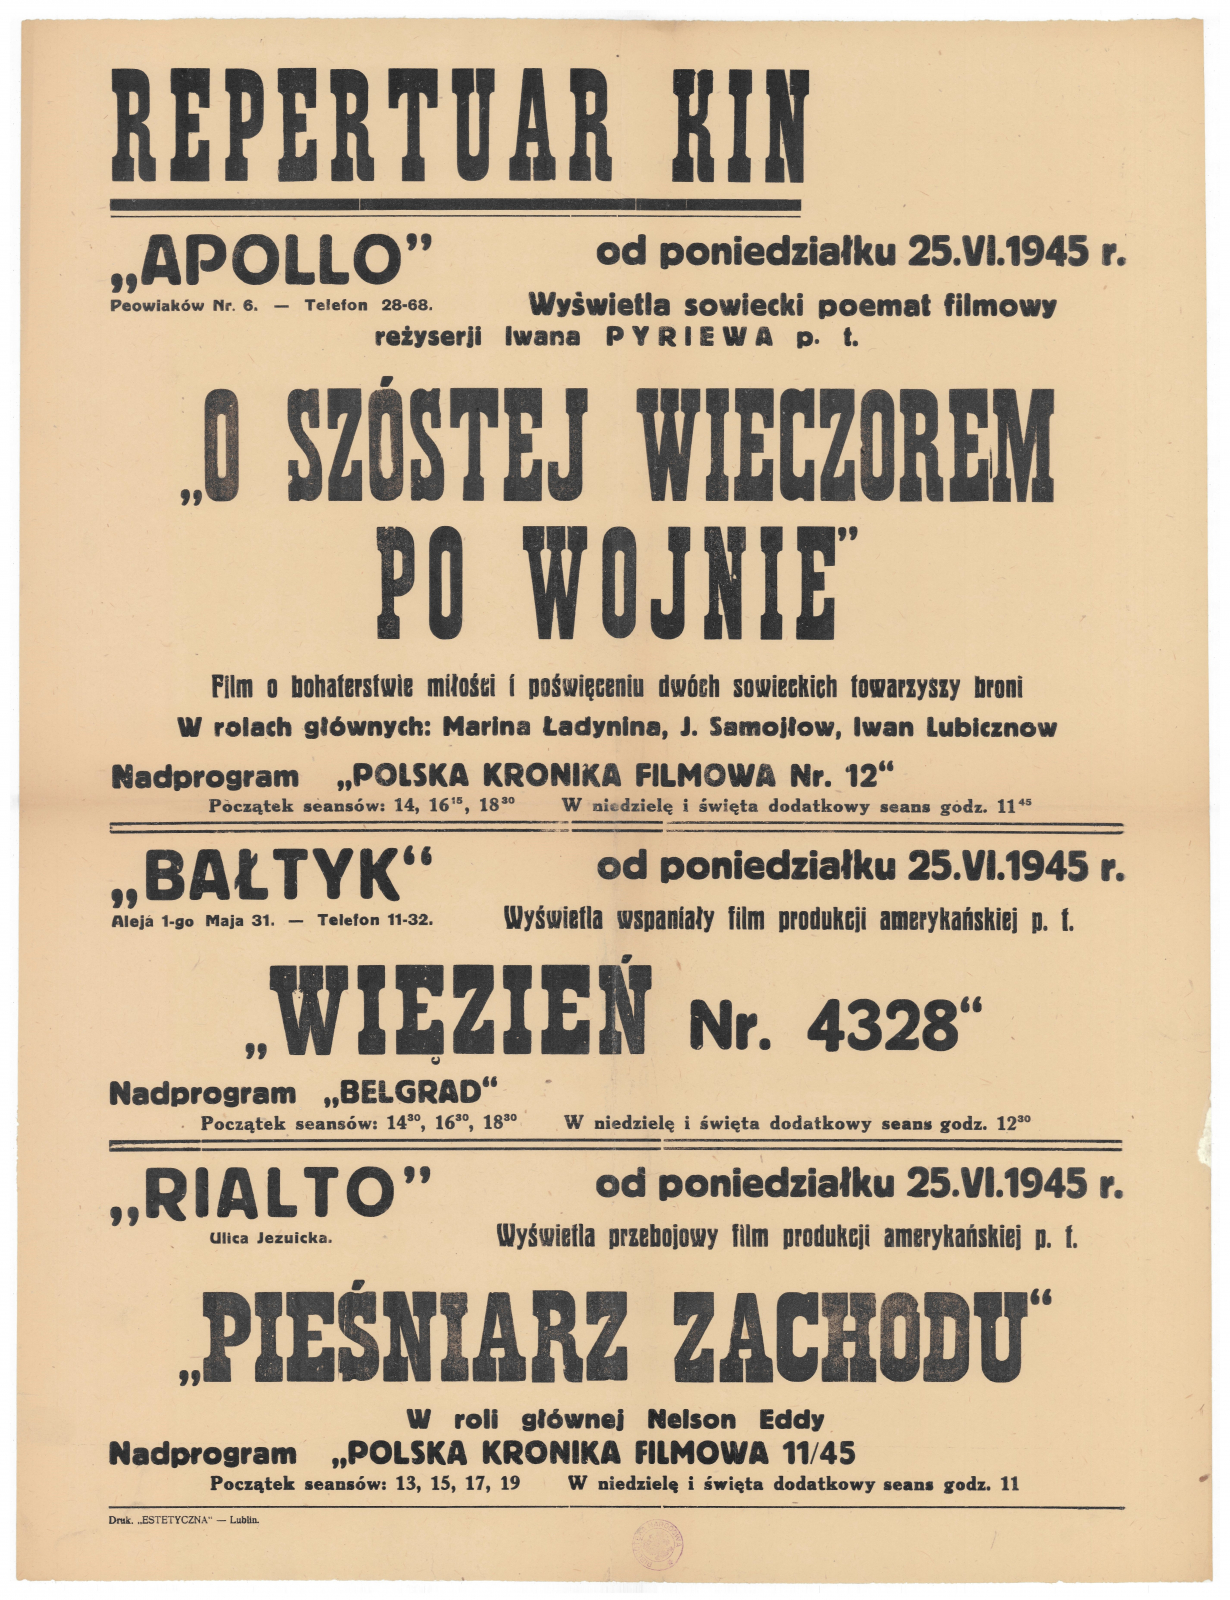 Film listings from three cinemas, which re-opened after World War II: the Apollo, the Bałtyk [Baltic], and the Rialto; Song of the Plains was screened at the Rialto, 1945, collection of the Polish National Library.